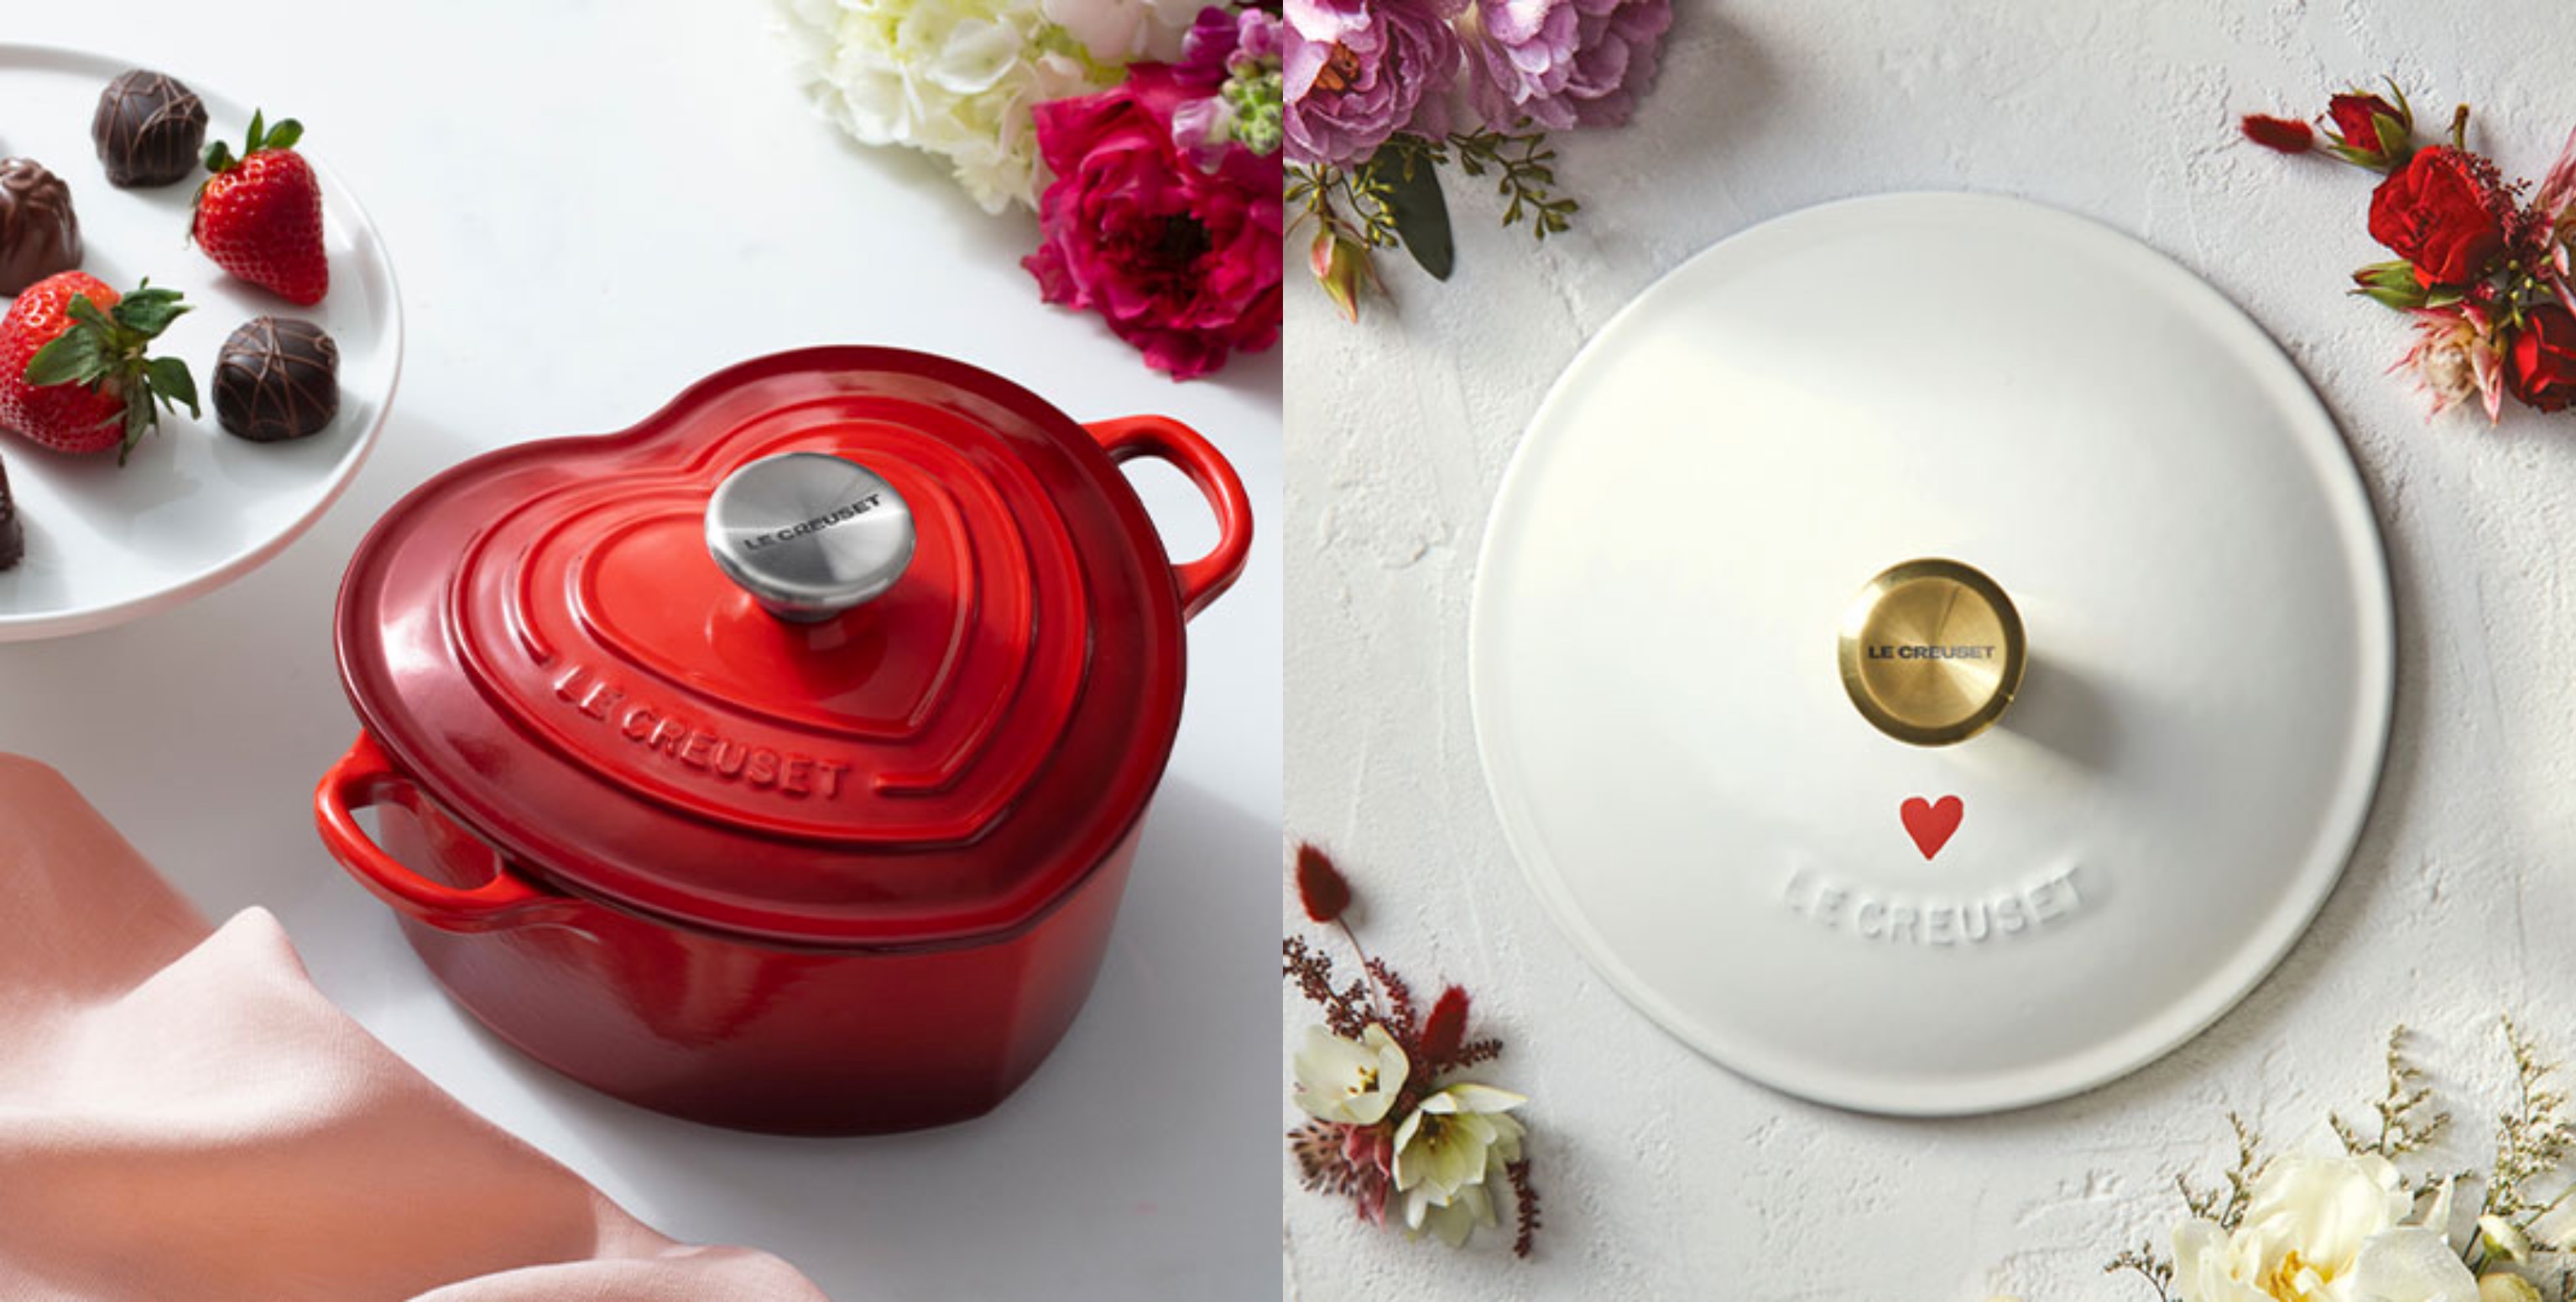 https://9to5toys.com/wp-content/uploads/sites/5/2022/01/Le-Creuset-Valentines-Day.jpg